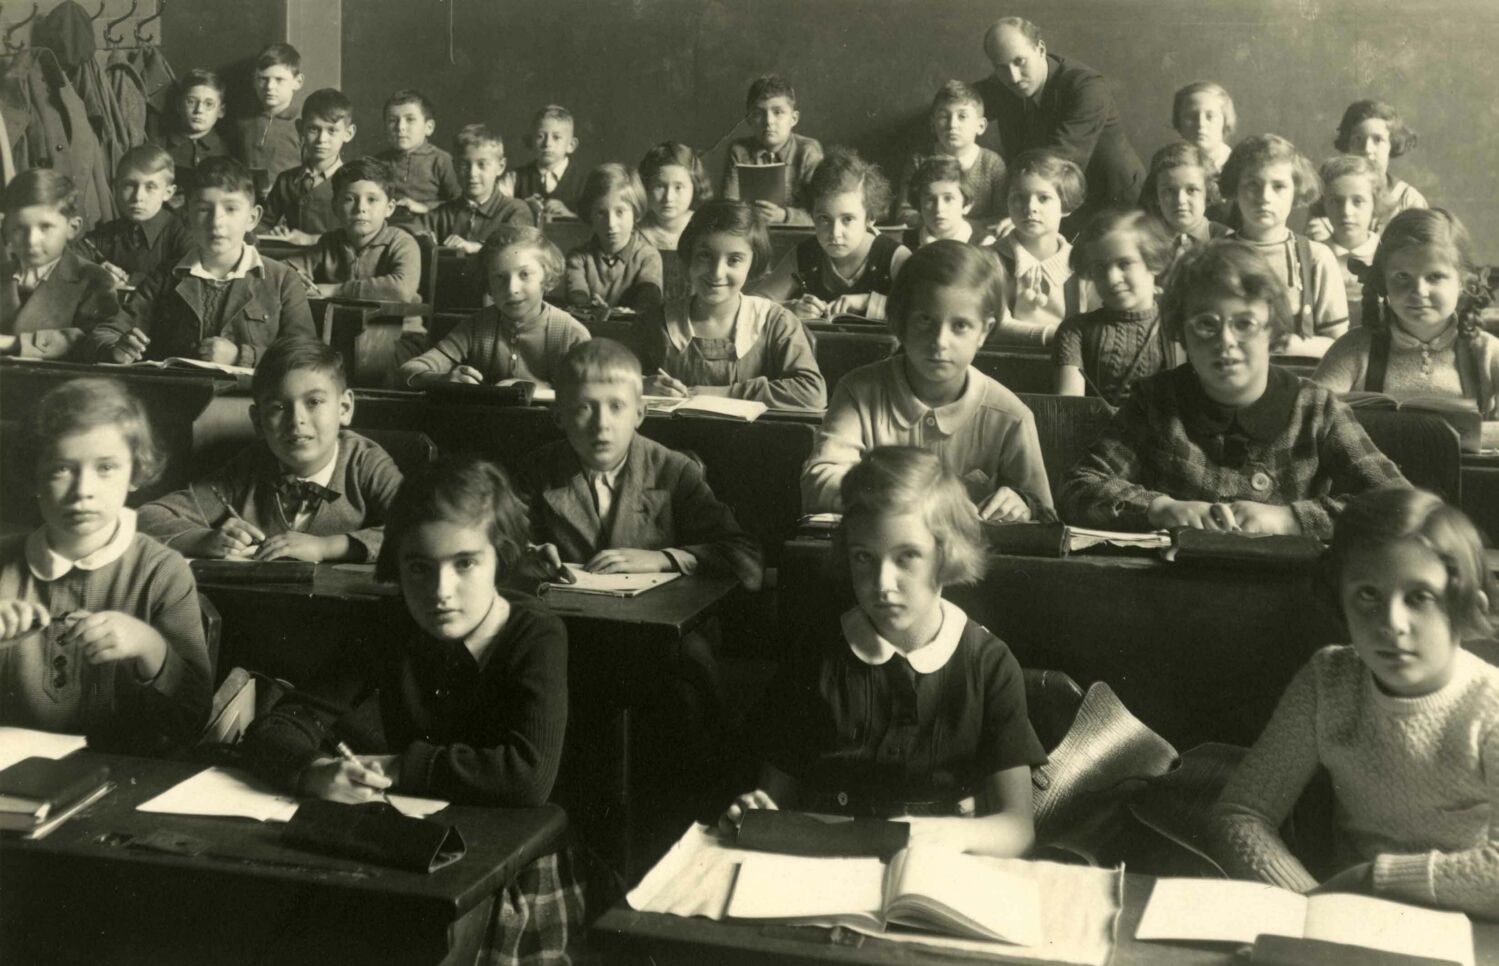 Young children sitting at desks with books open, looking at the camera, a teacher leaning over one child's desk at the back of the classroom.